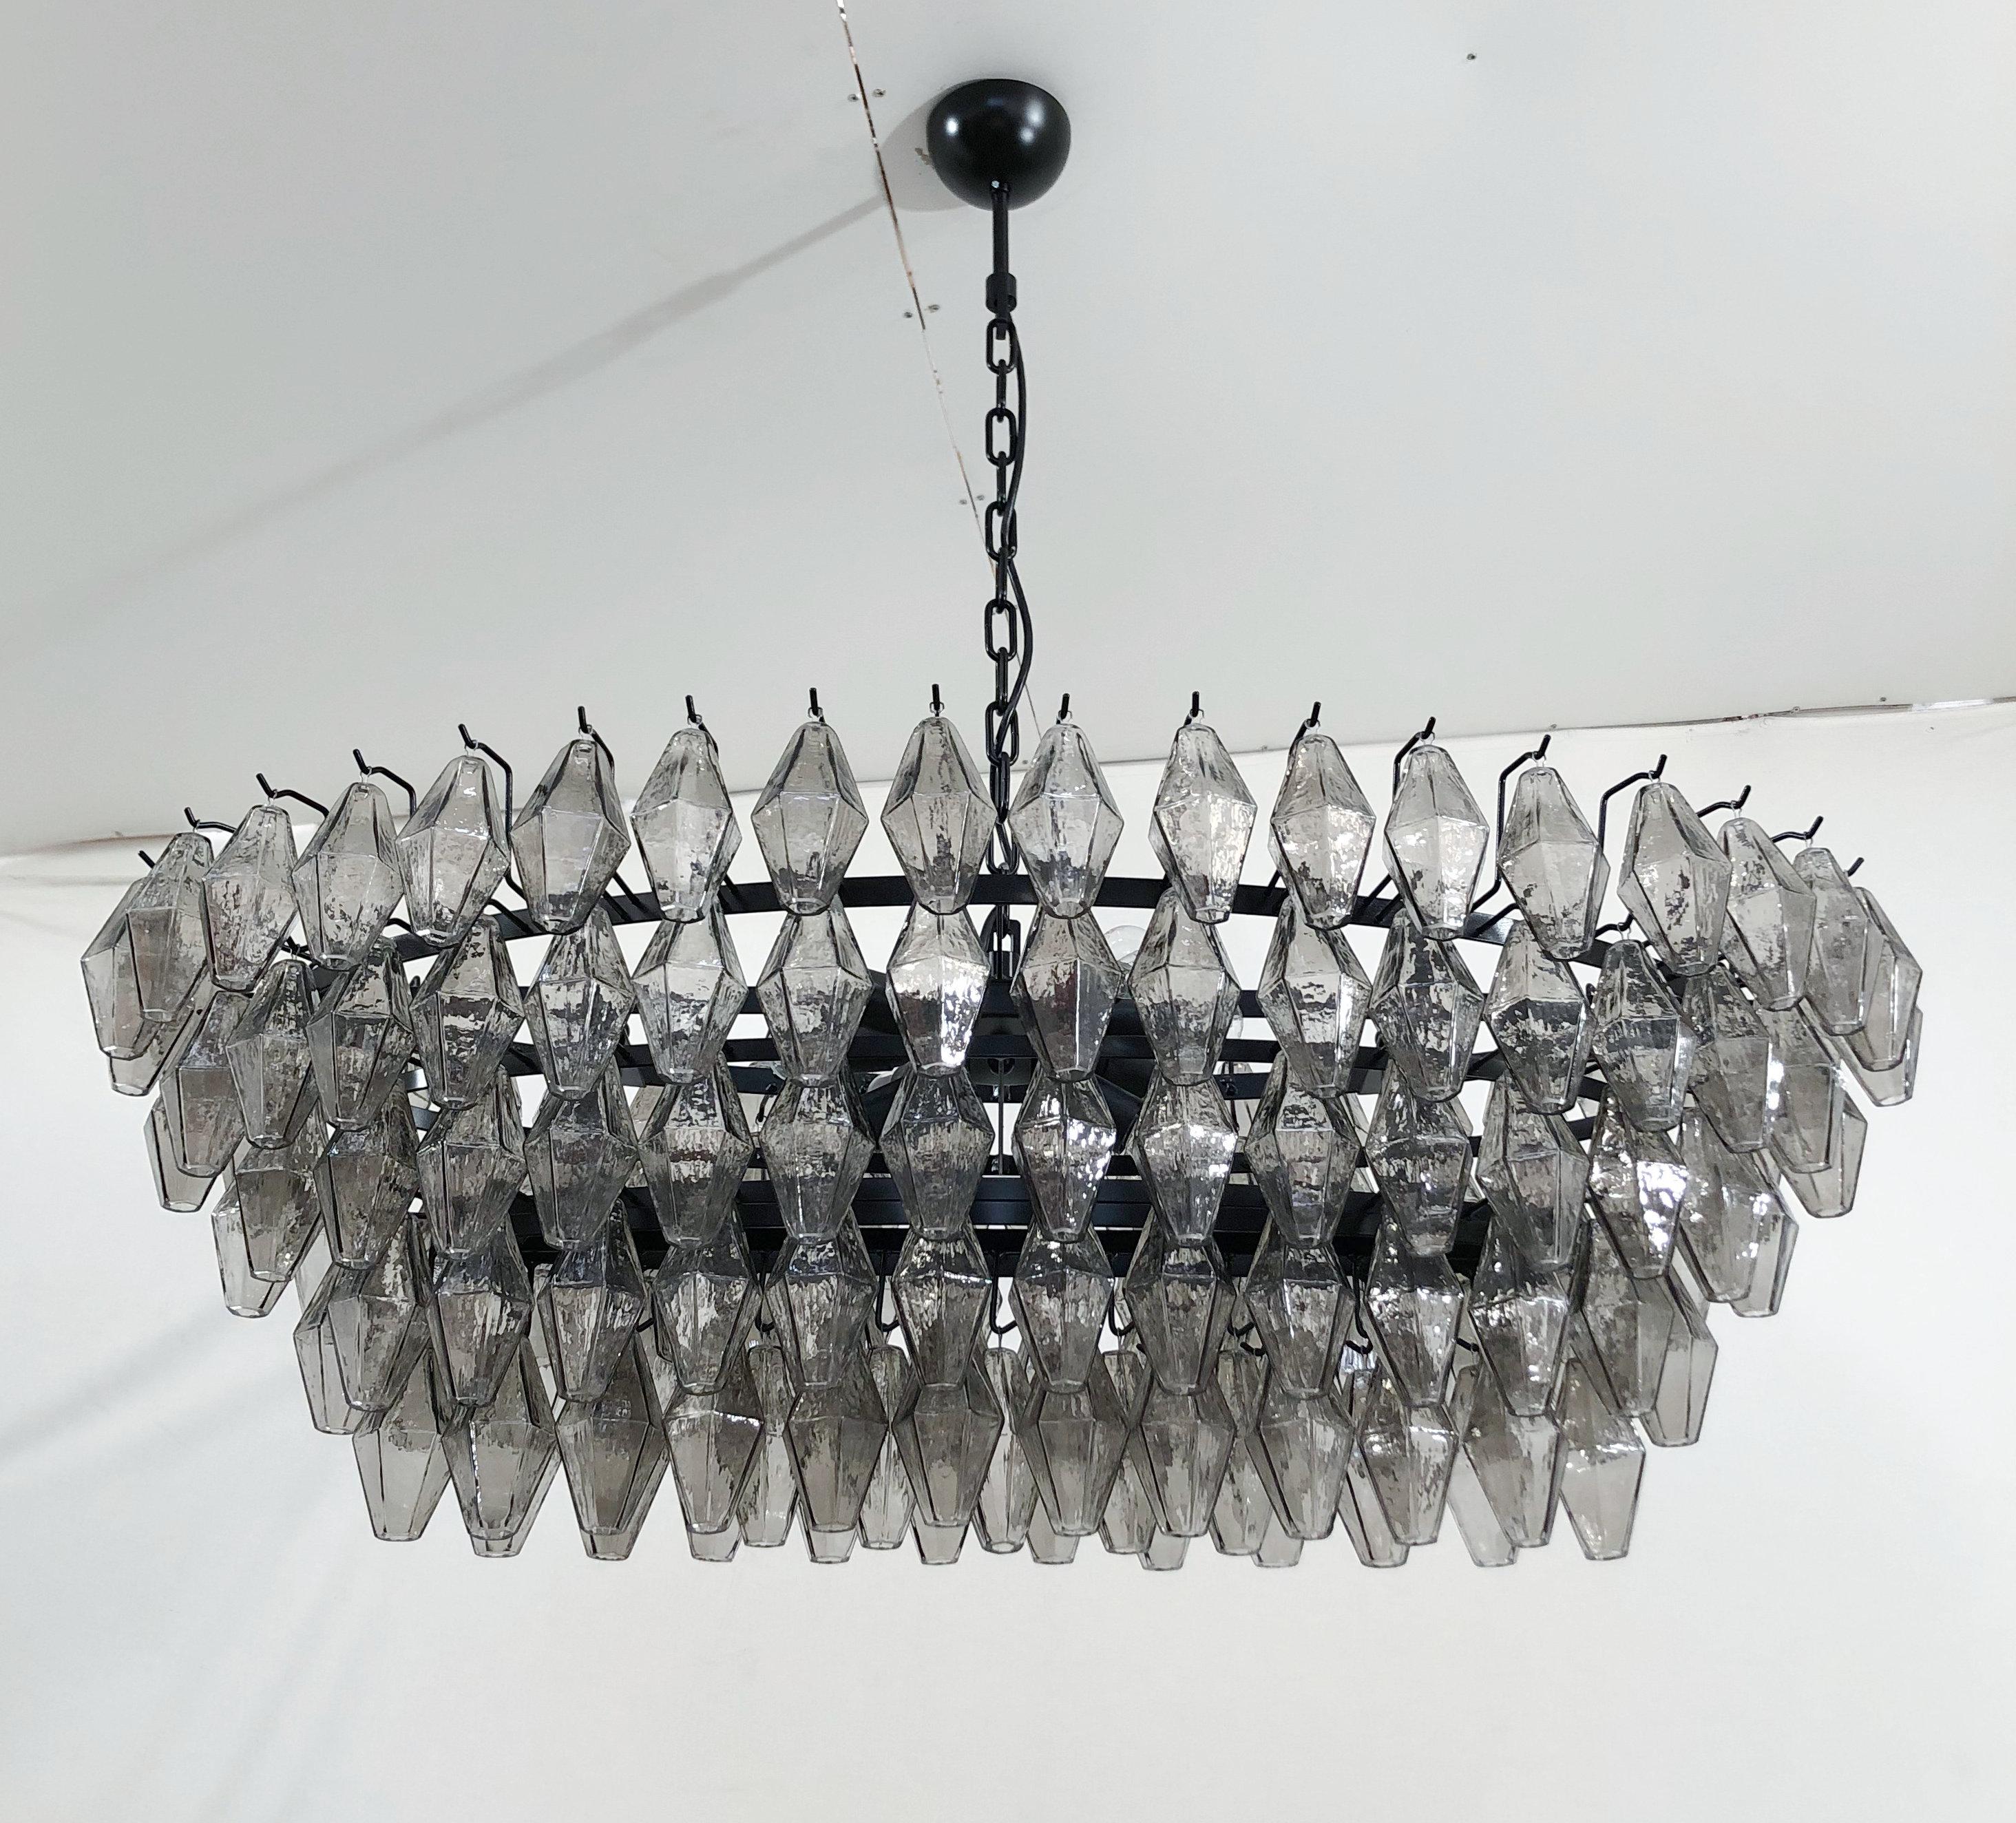 Italian oval shaped chandelier with smoky polyhedron / polyhedral shaped Murano glasses mounted on matte black powder coated finish frame / Made in Italy
Measures: Length: 47 inches, width 24 inches, height 16 inches plus chain and canopy
8 lights